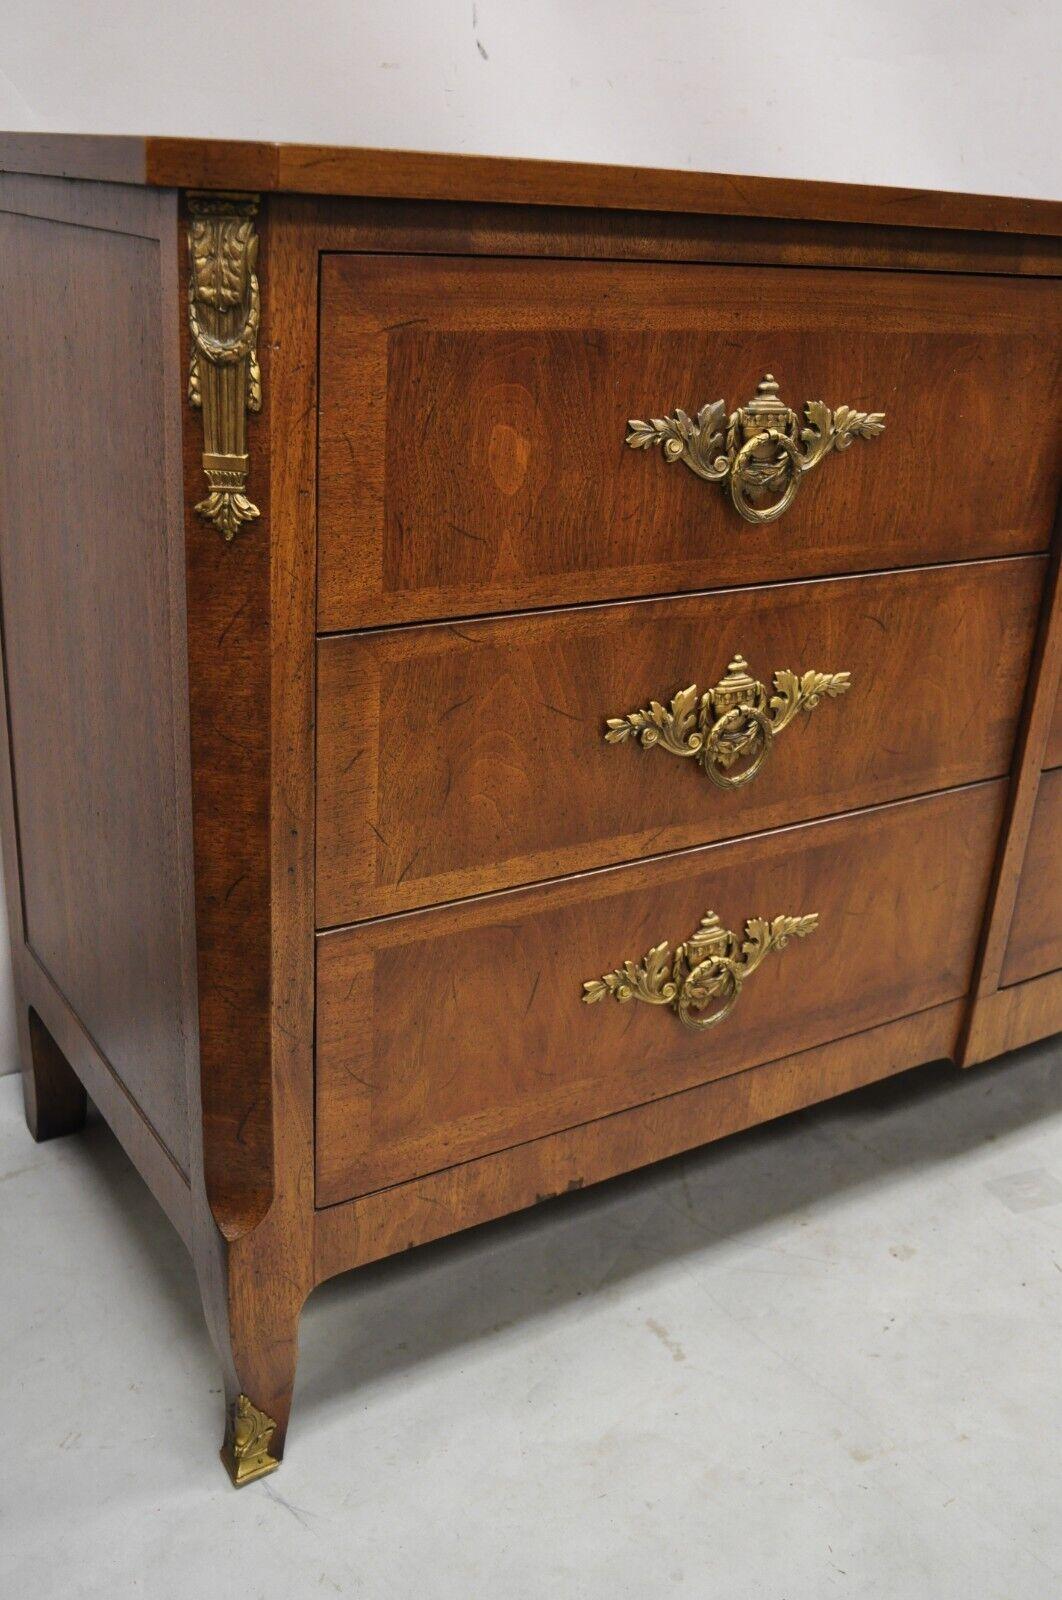 Vintage Henredon French Louis XV style walnut 9 drawer triple dresser. Item features ornate brass ormolu, leafy scroll and urn brass back plates, brass capped front legs, banded drawer fronts and top, beautiful wood grain, original stamp, 9